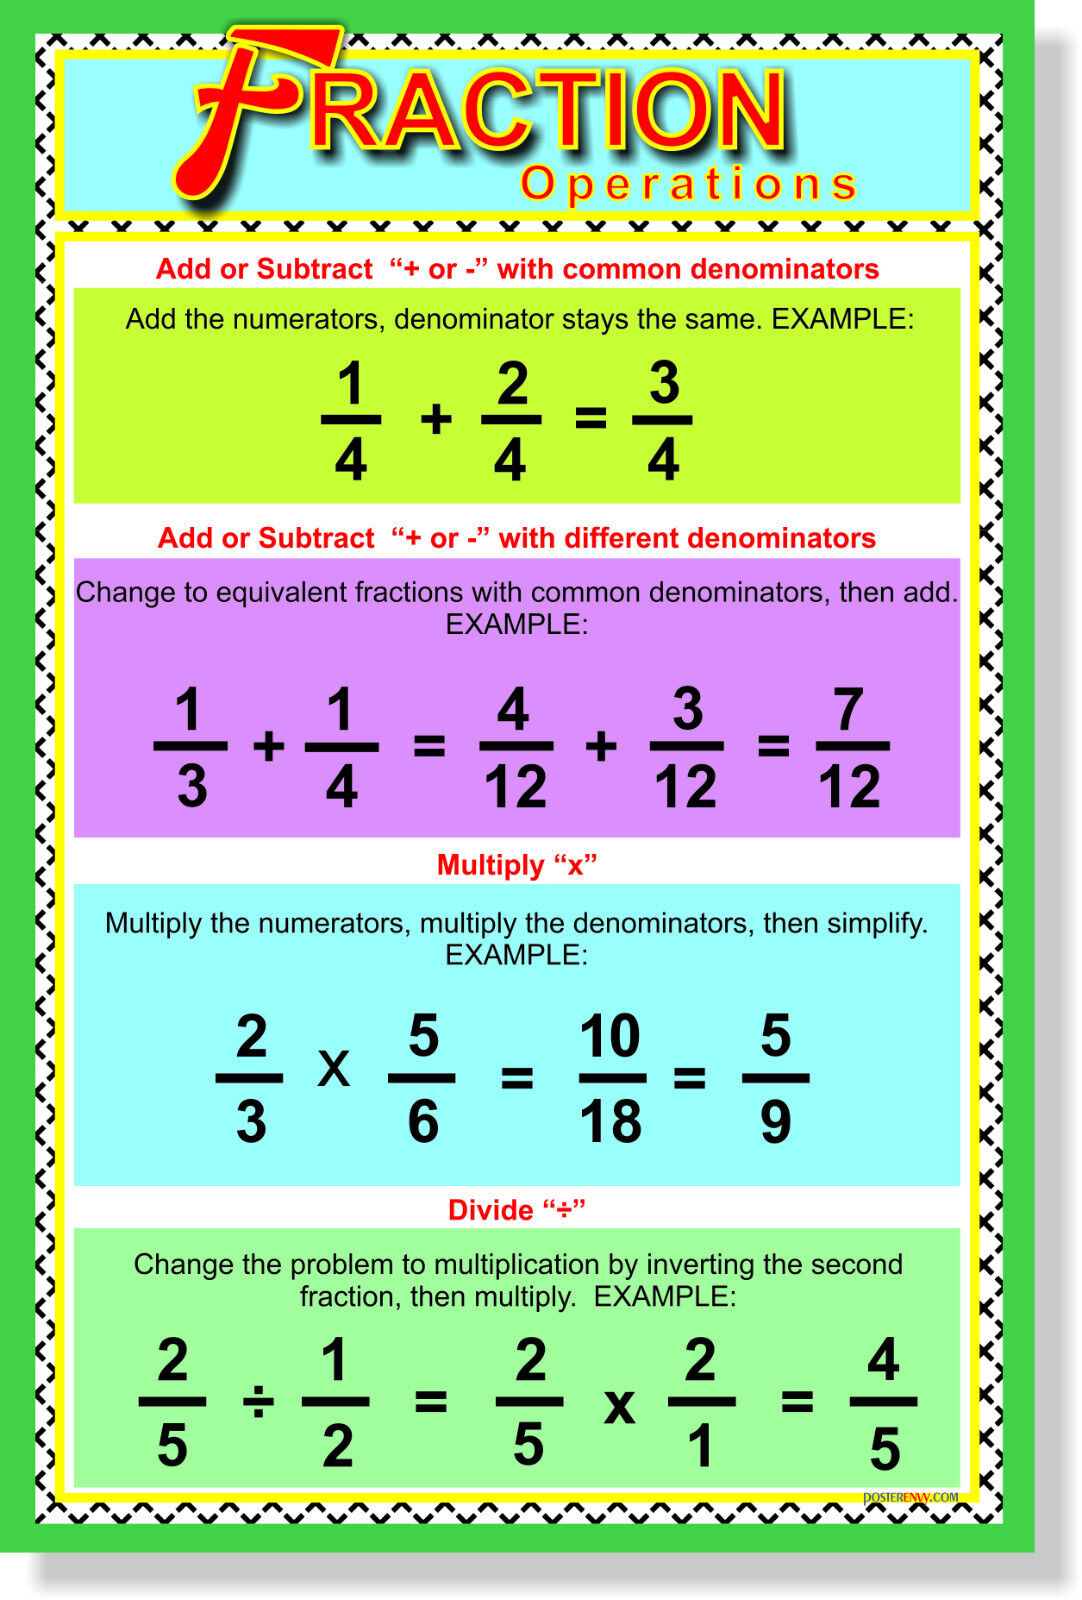 fraction-operations-new-educational-math-classroom-poster